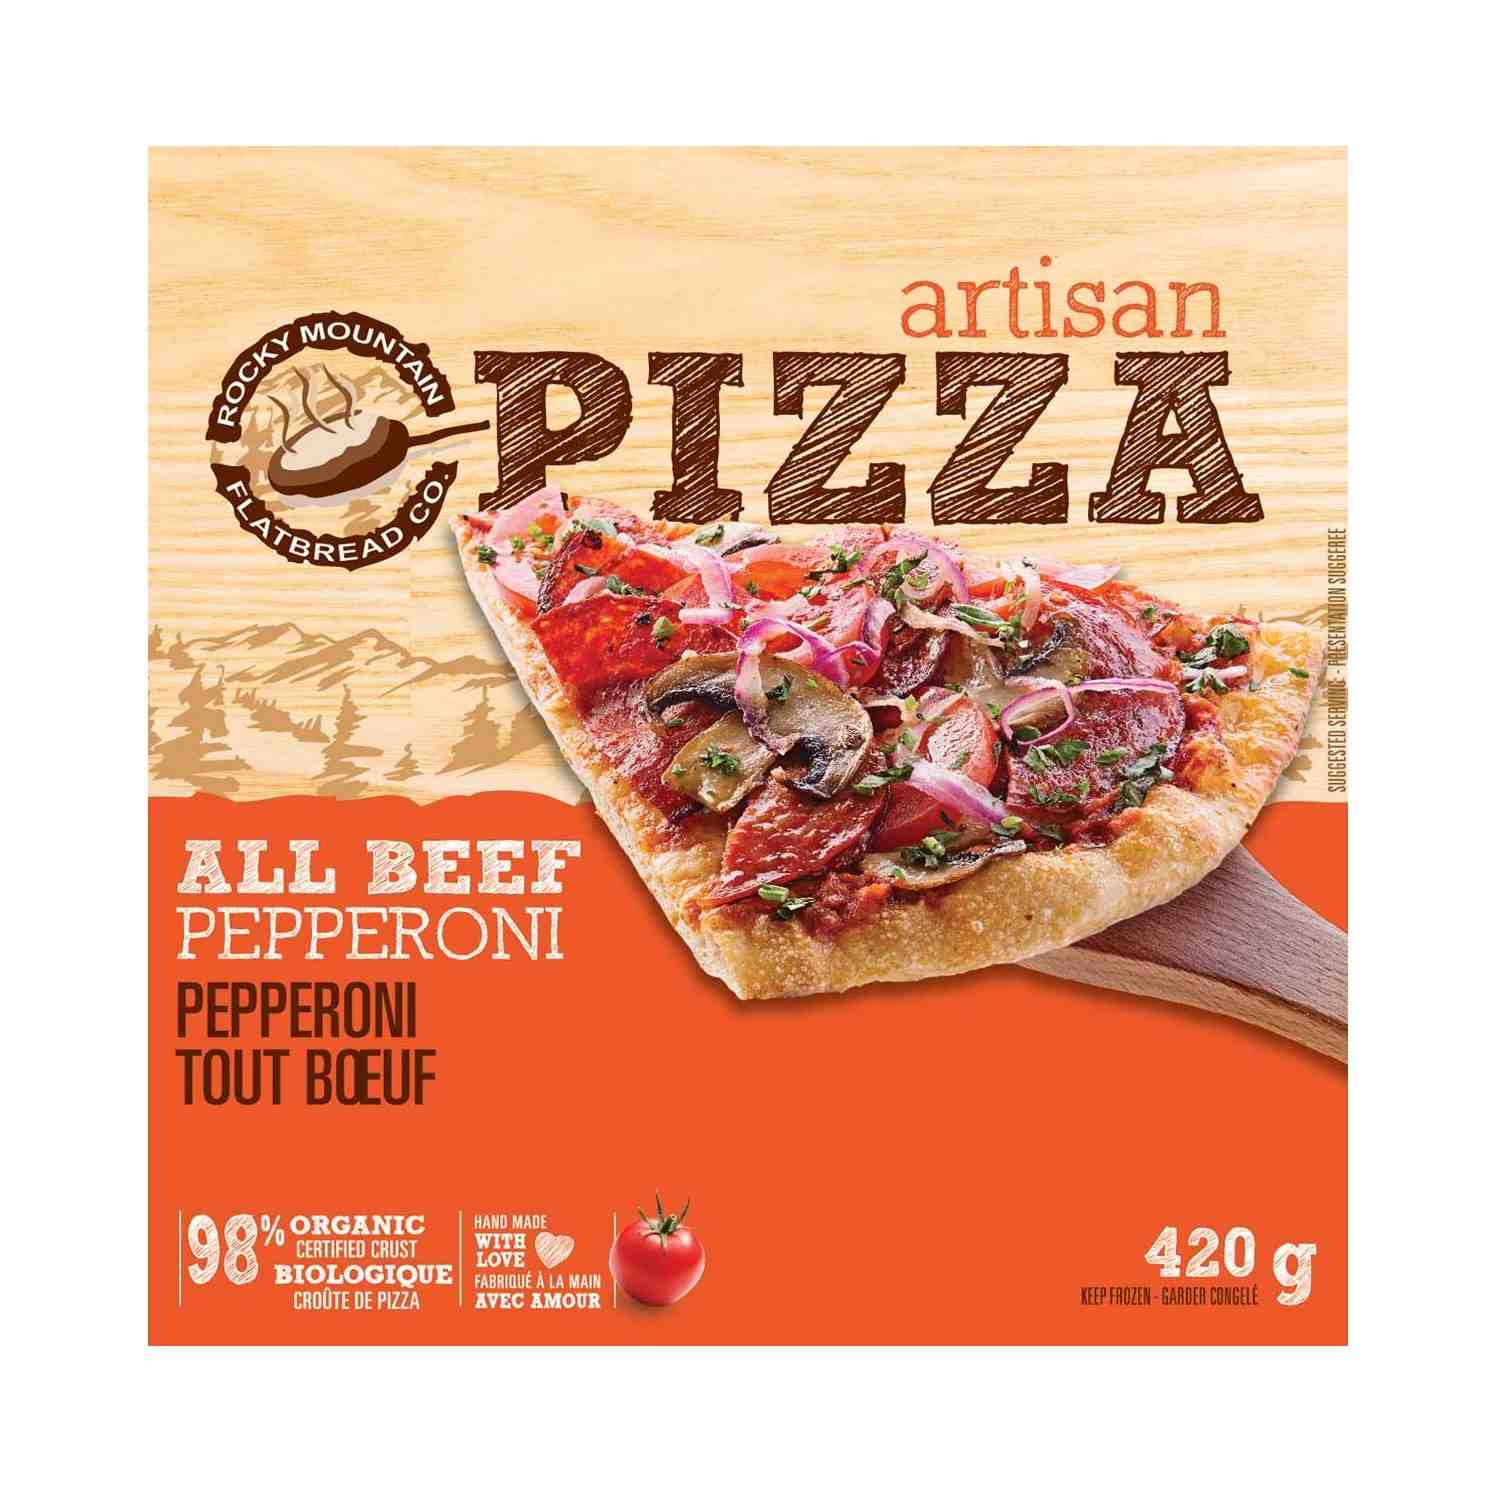 What is the white stuff in pepperoni?